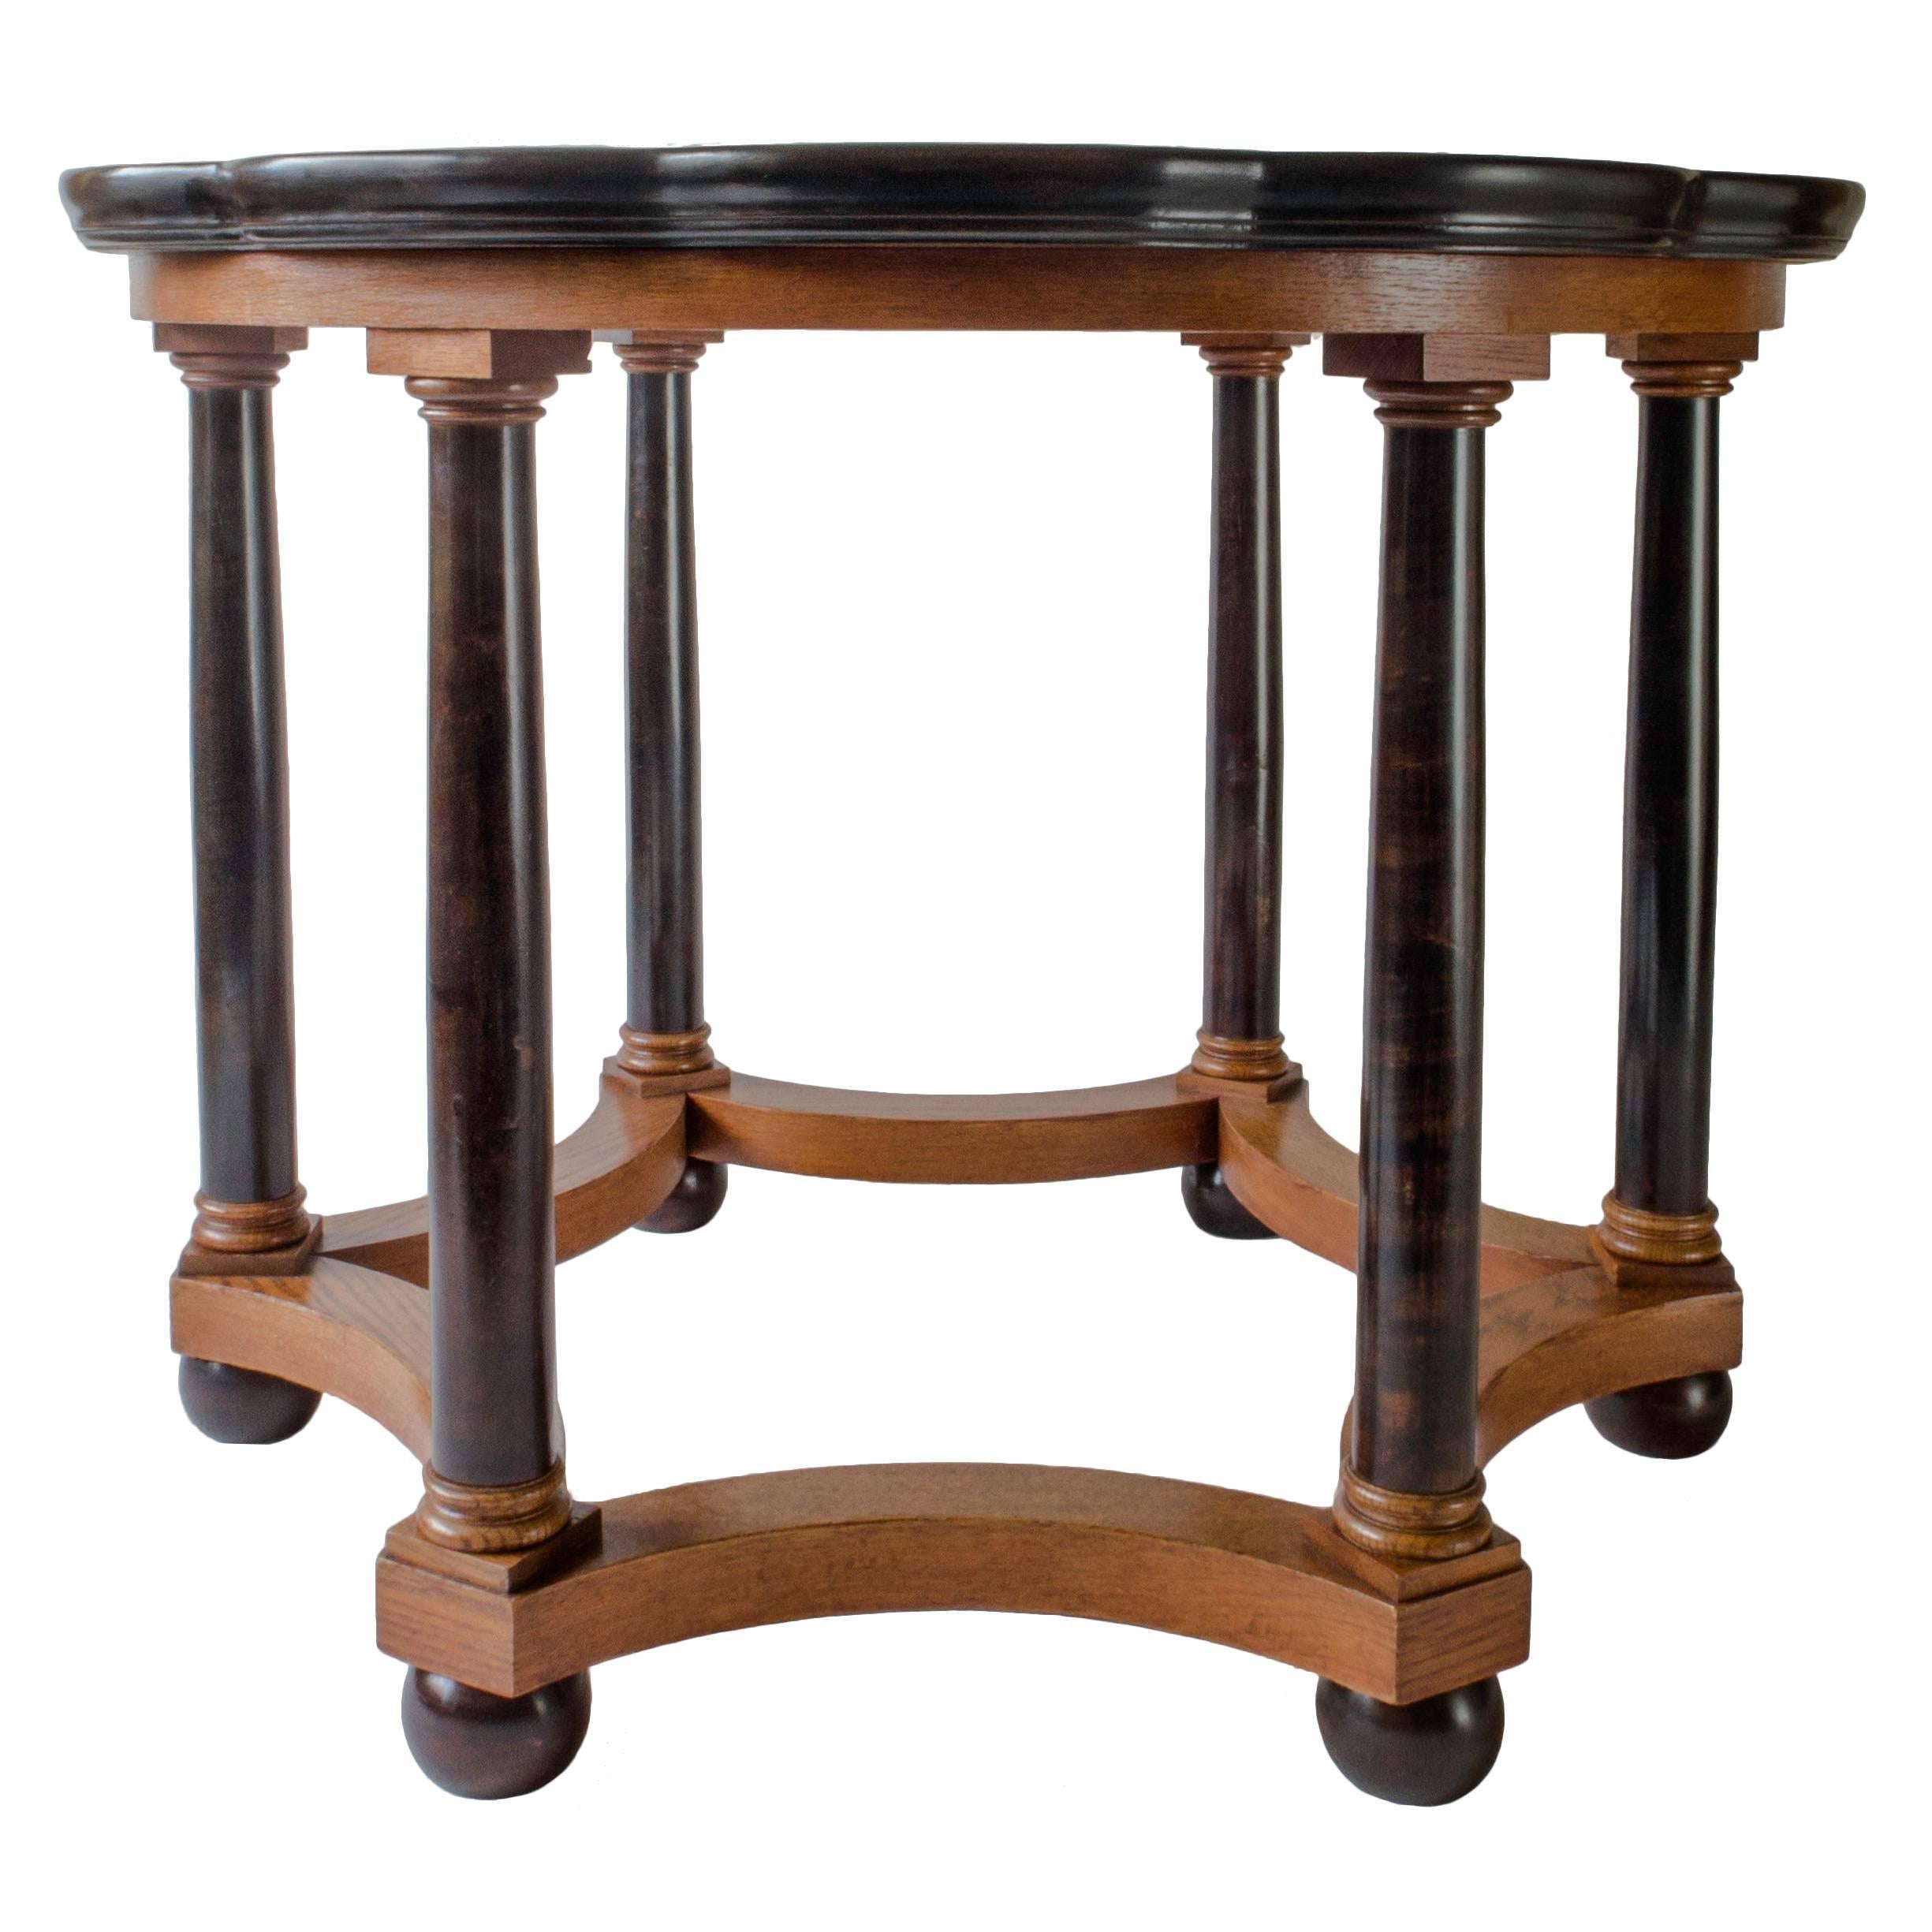 Professionally restored, in great condition and ready to add to your collection.

The dodecafoil top displaying oak and birch marquetry within a raised ebonized border, the conforming apron above ebonized birch columns with oak plinths and